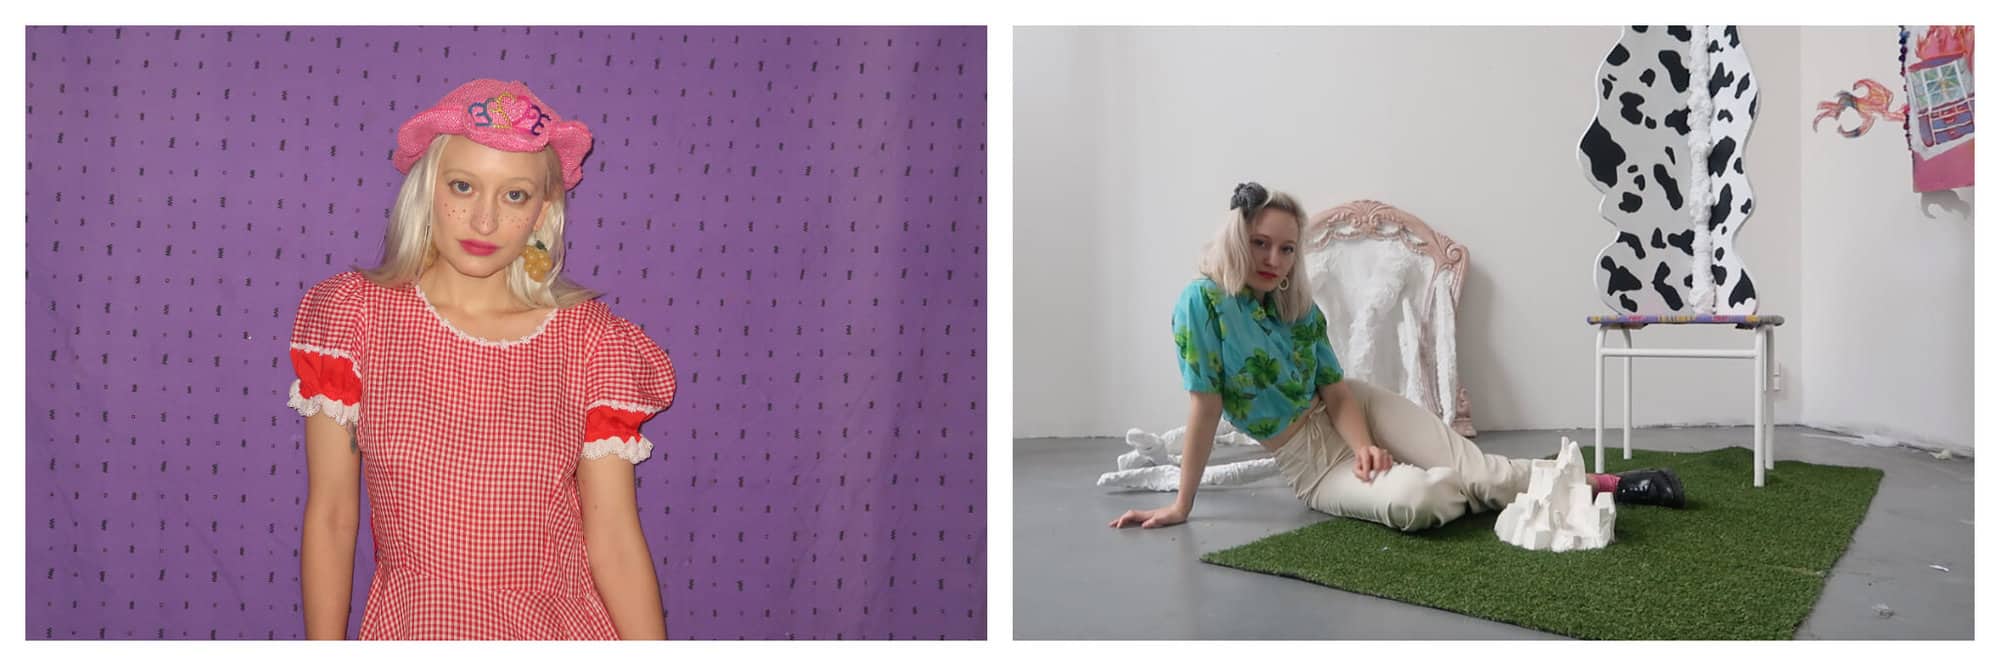 Left: A woman stands in front of a purple and black polka dot curtain. She has long platinum blonde hair and is wearing a pink rhinestoned hat and a red and white gingham dress. Right: The same woman is sitting on the floor in a white room. There are various sculptures around her and she is sitting on a patch of fake grass. 